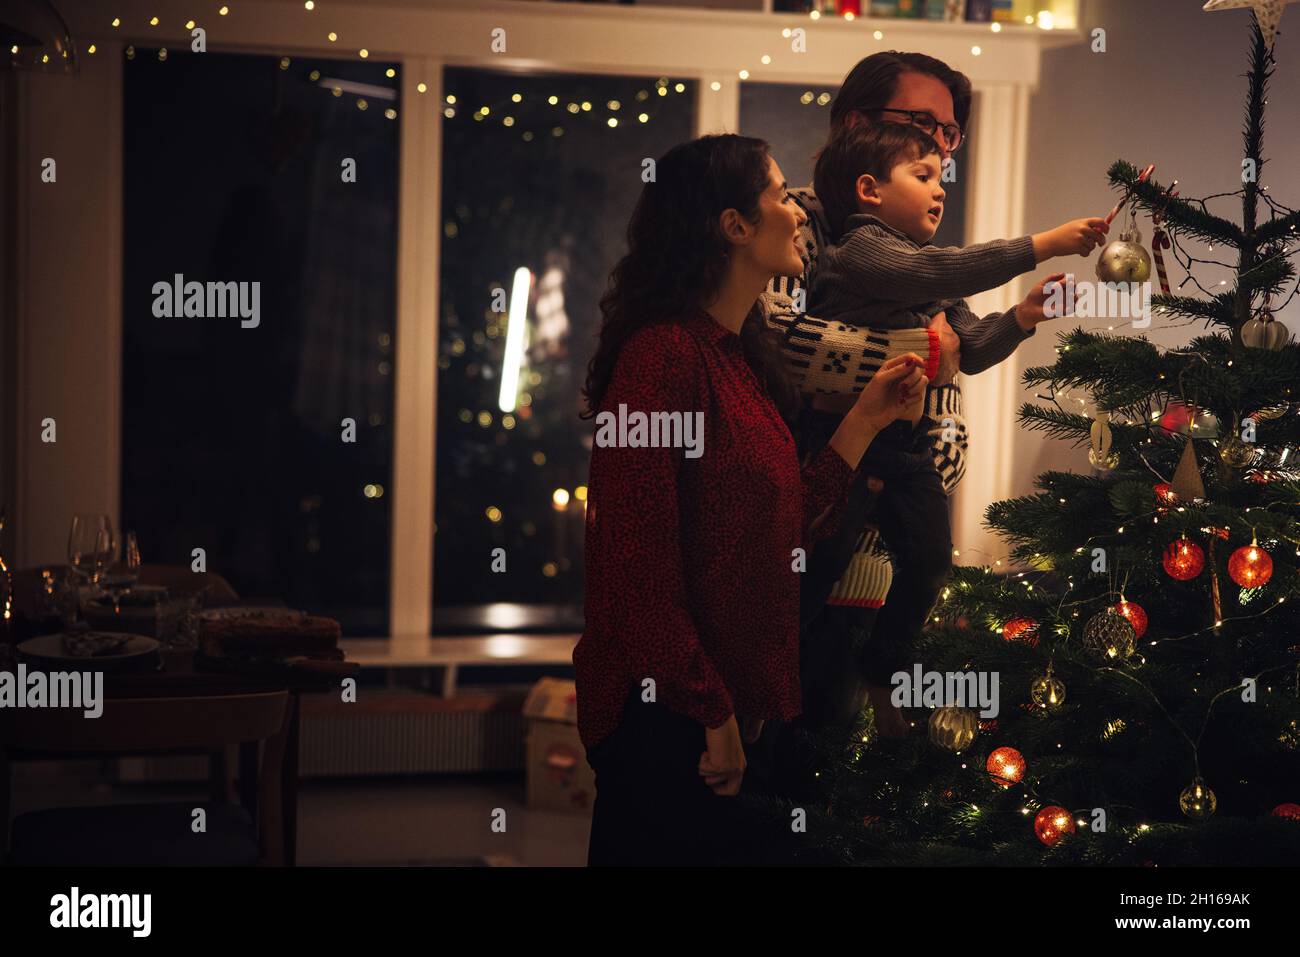 Small family decorating Christmas tree together at home. Parents with child decorating home for Christmas celebrations. Stock Photo